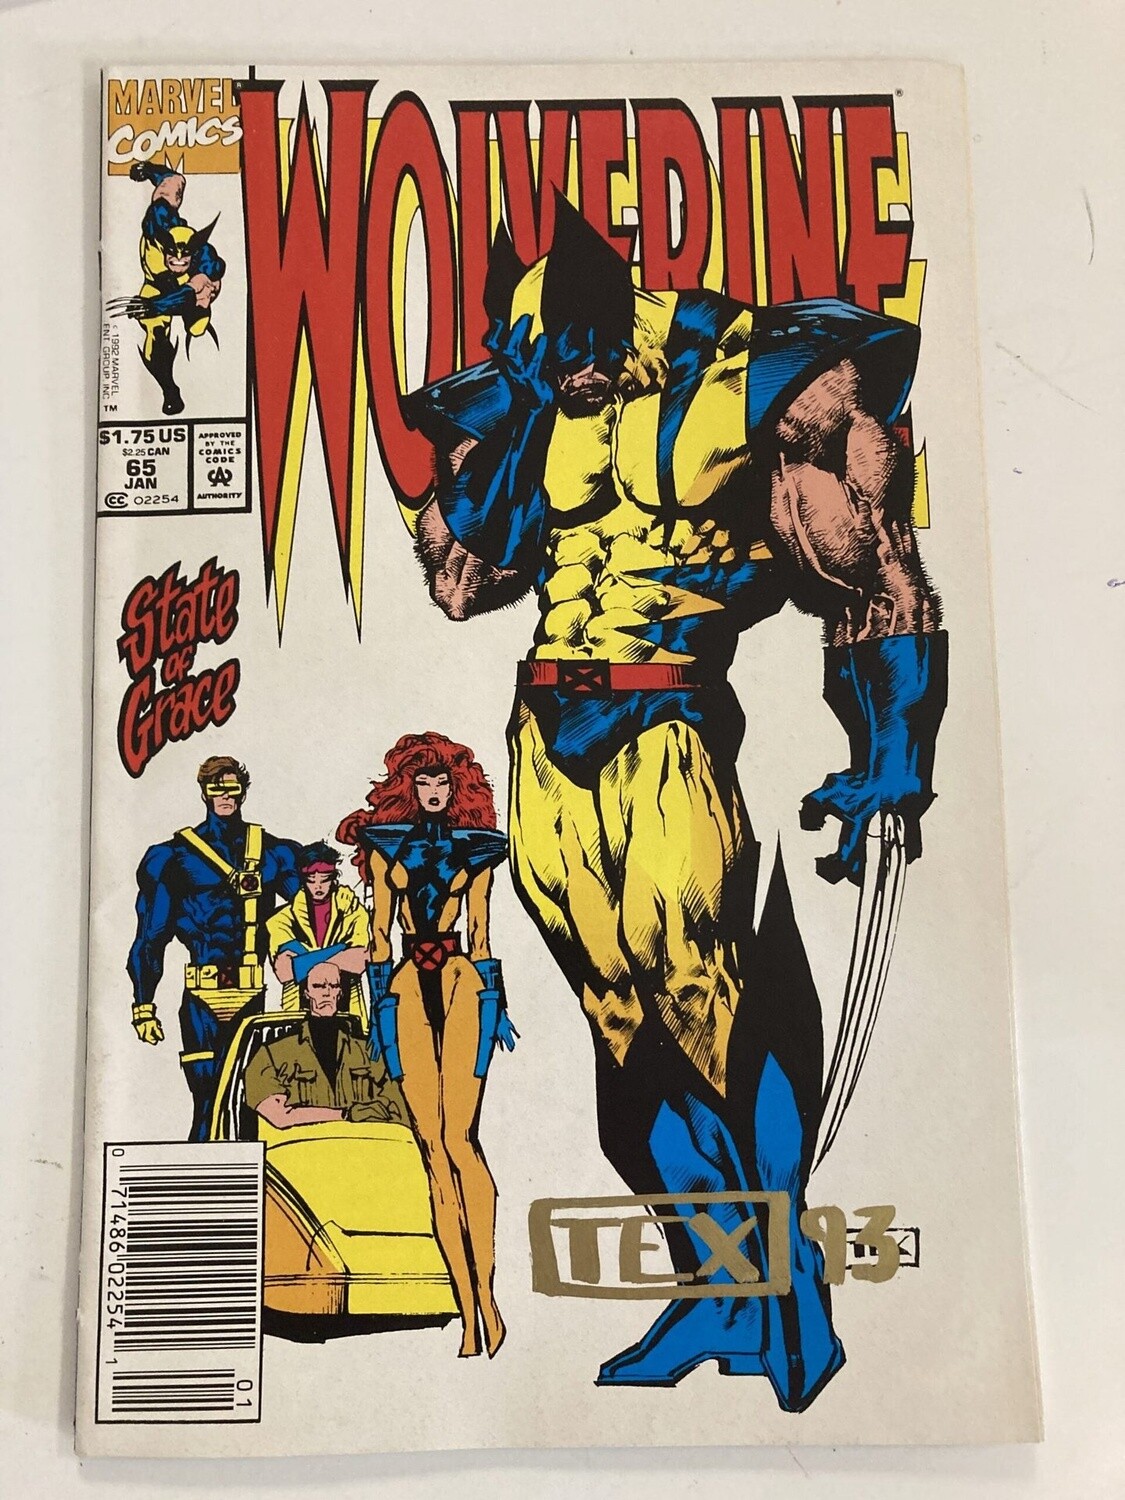 Wolverine #65 F+ (Signed by Mark Teixeira)